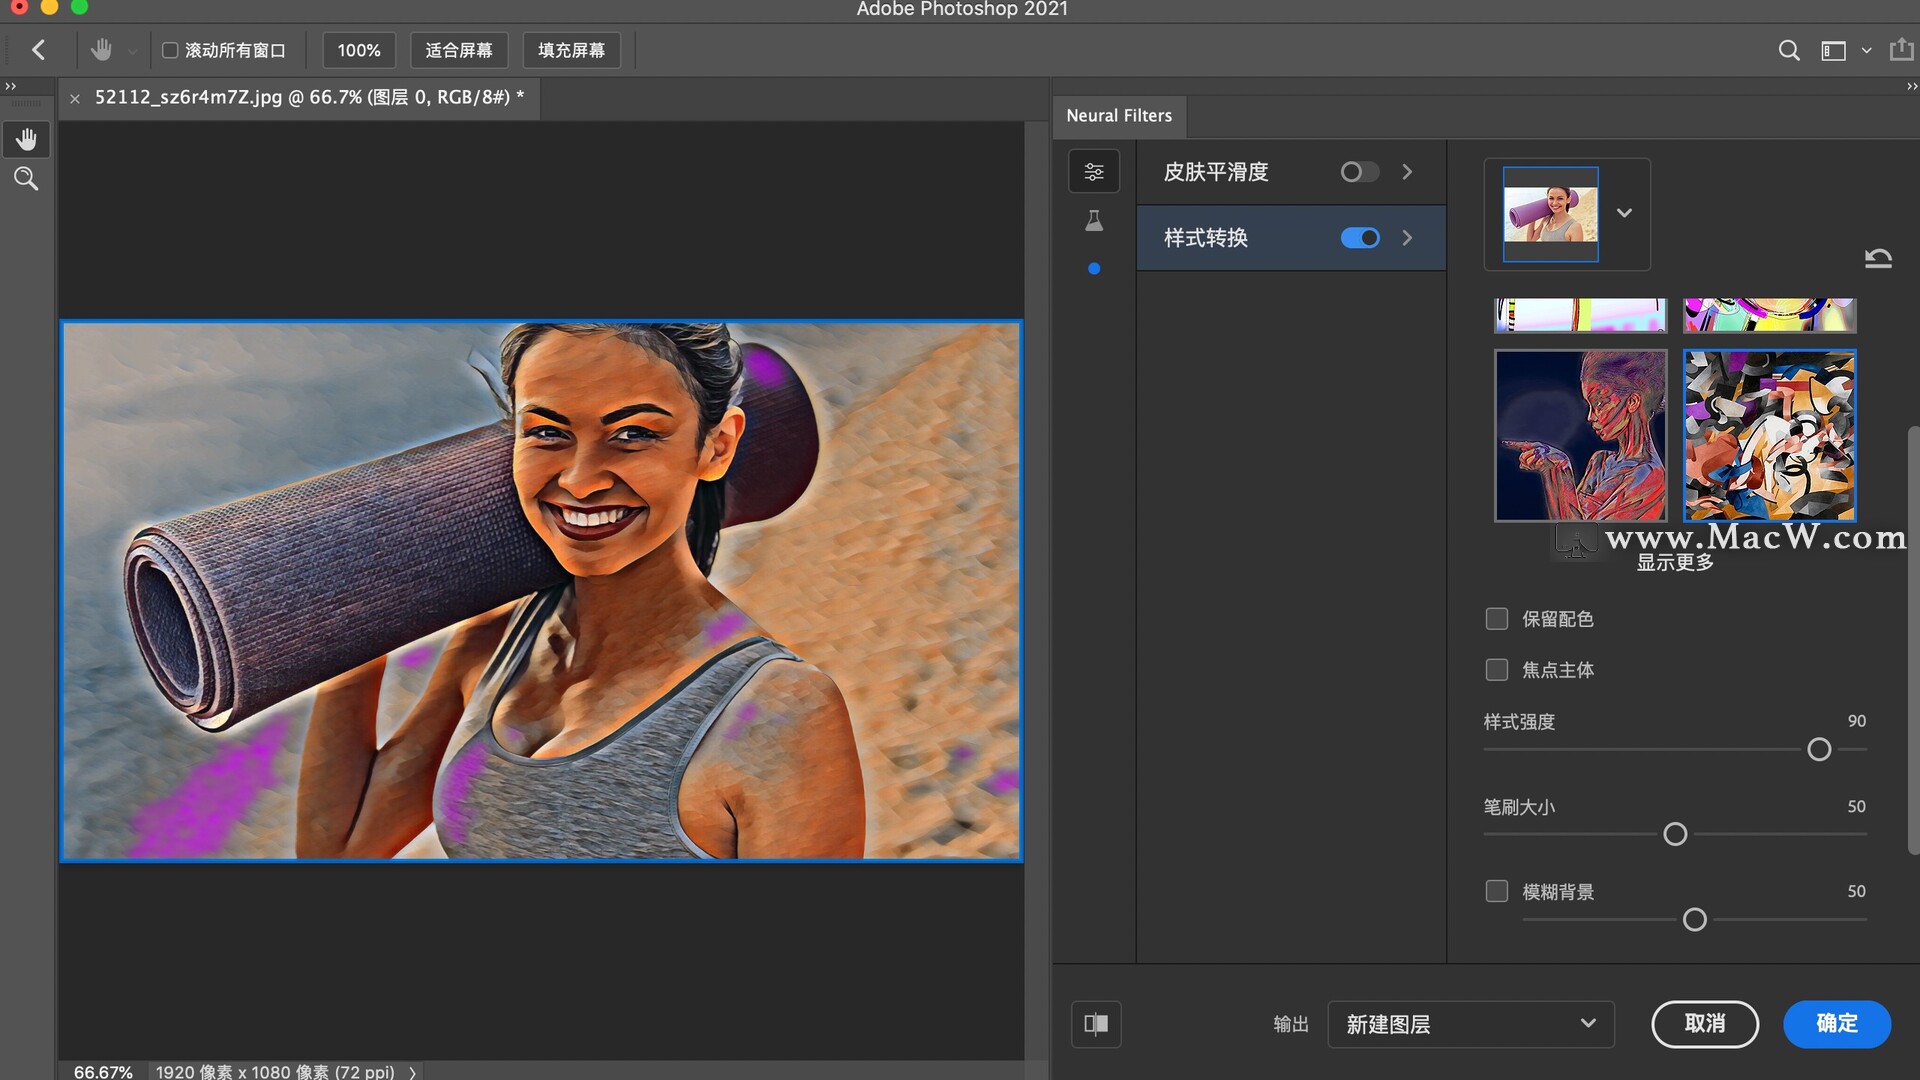  Neural Filters for Photoshop 2021(ps2021逆天滤镜库)